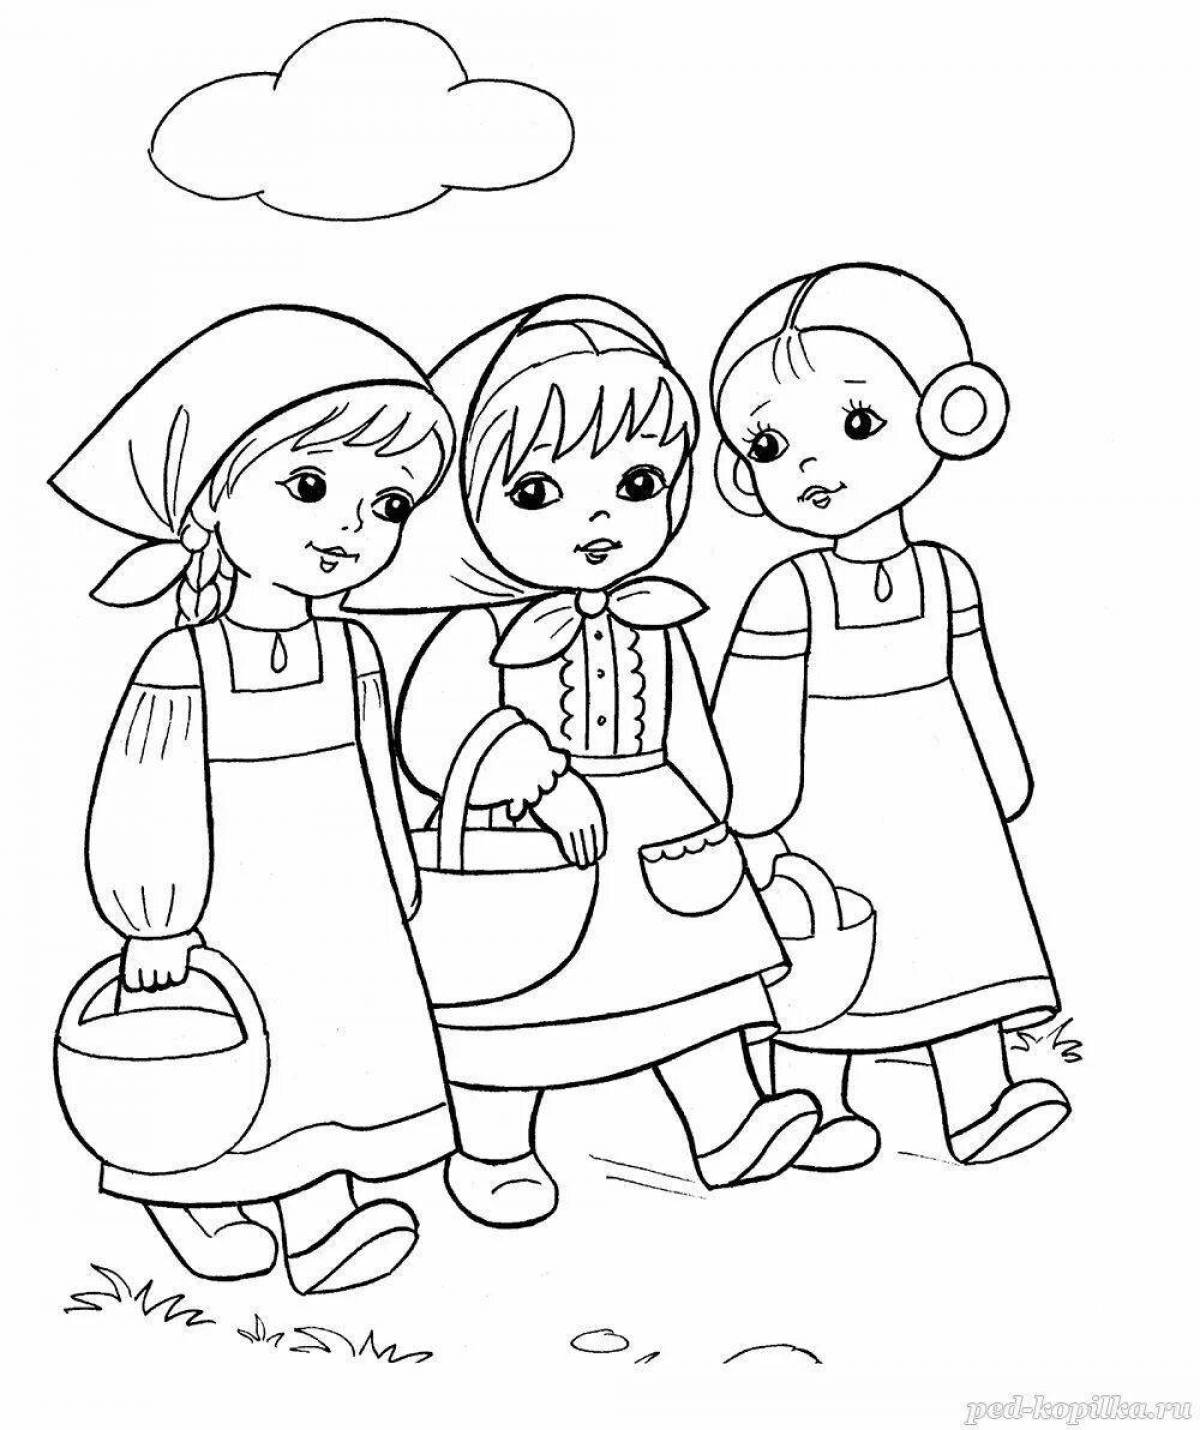 Playful fairy tale coloring for girls